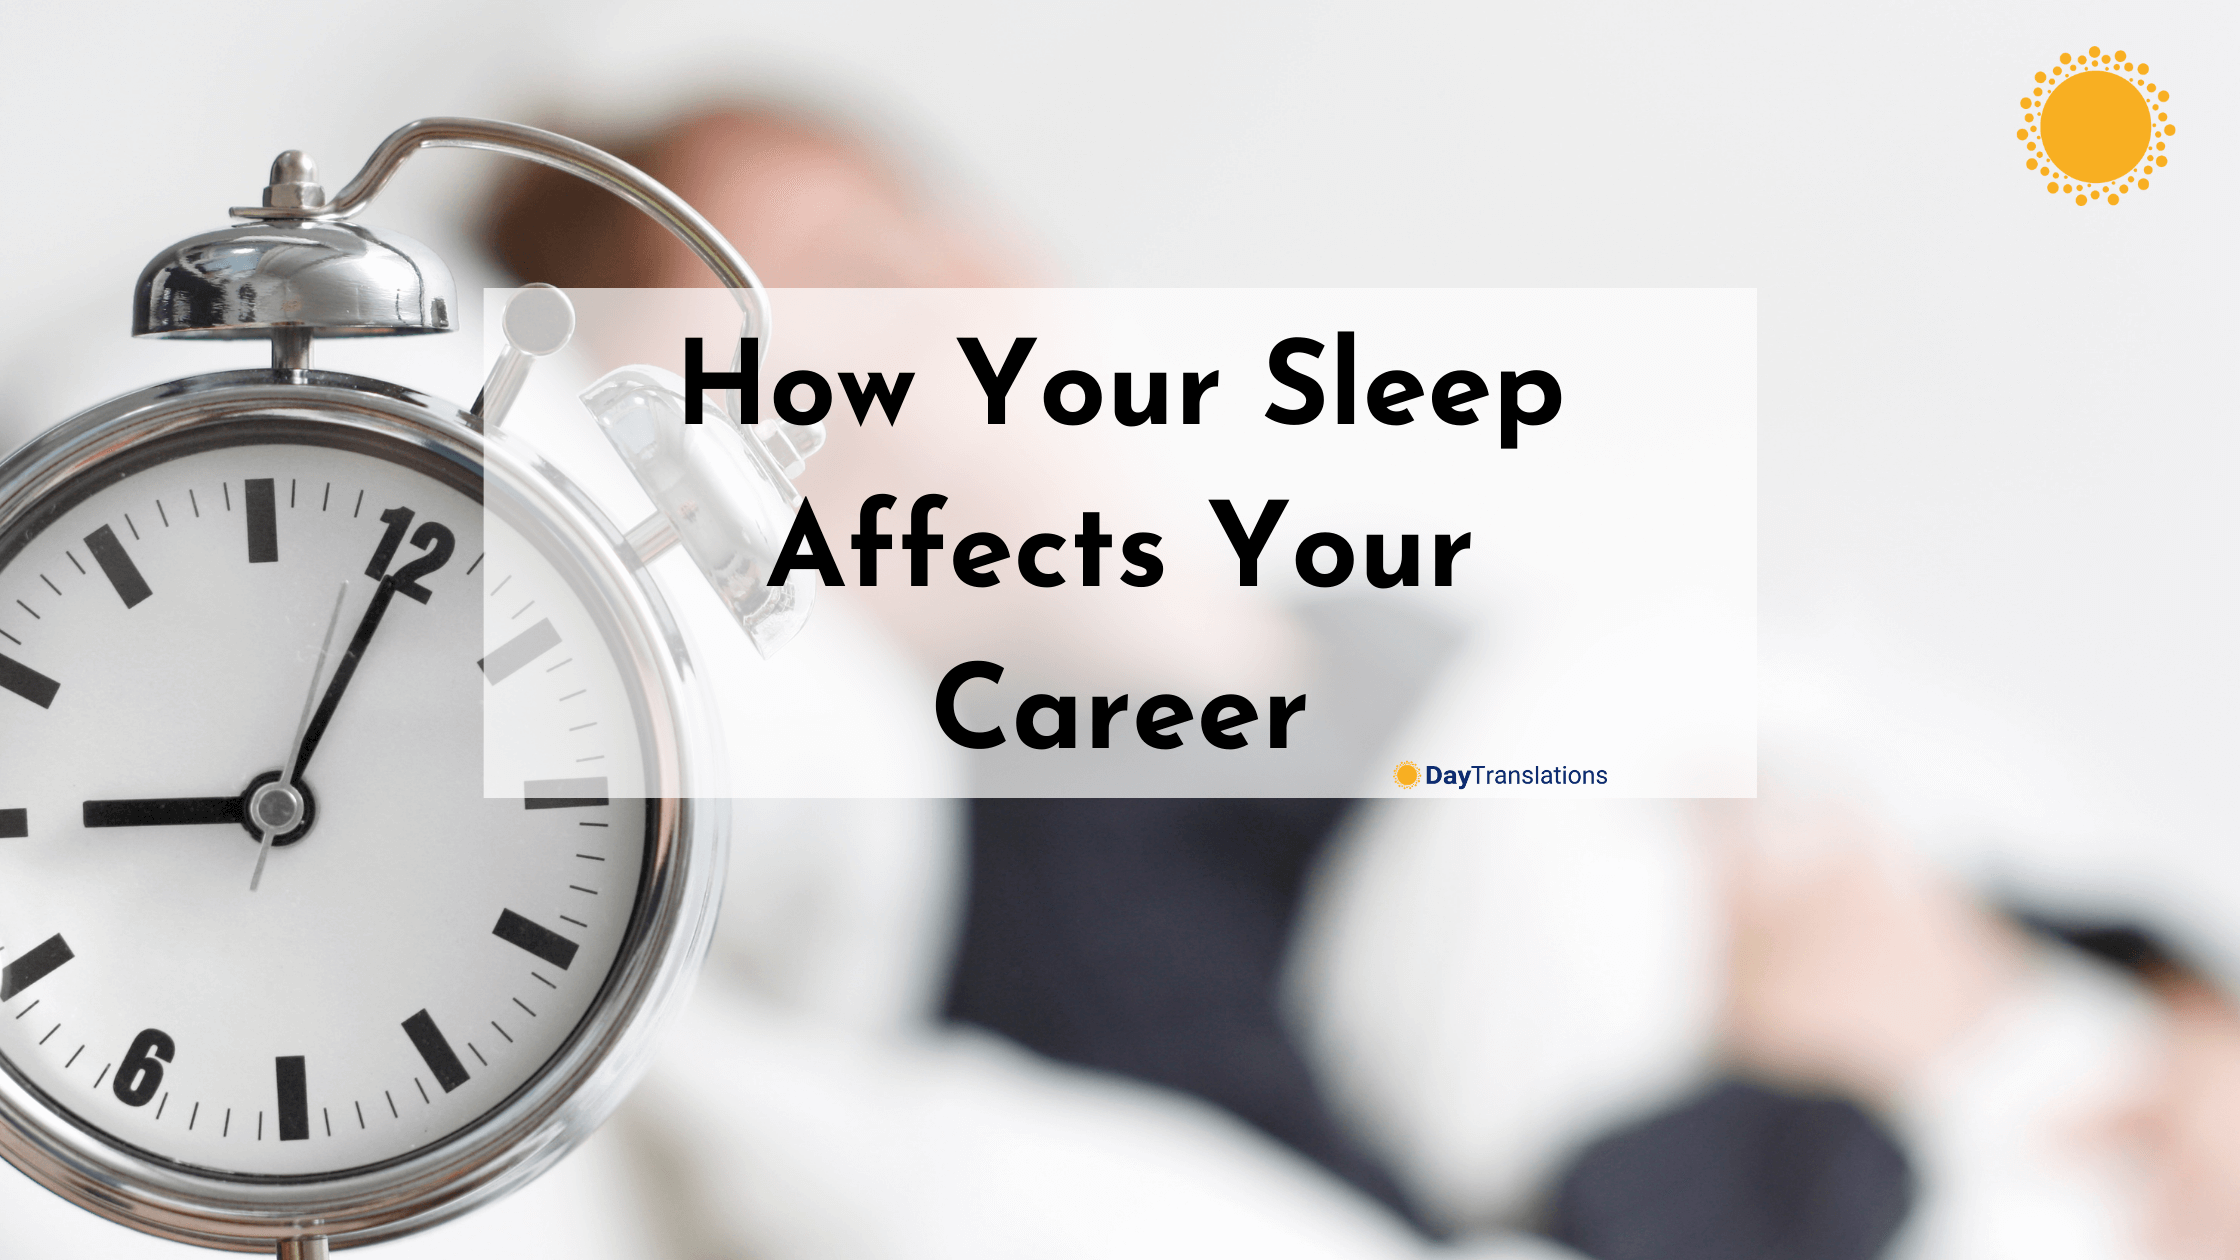 How Your Sleep Affects Your Career